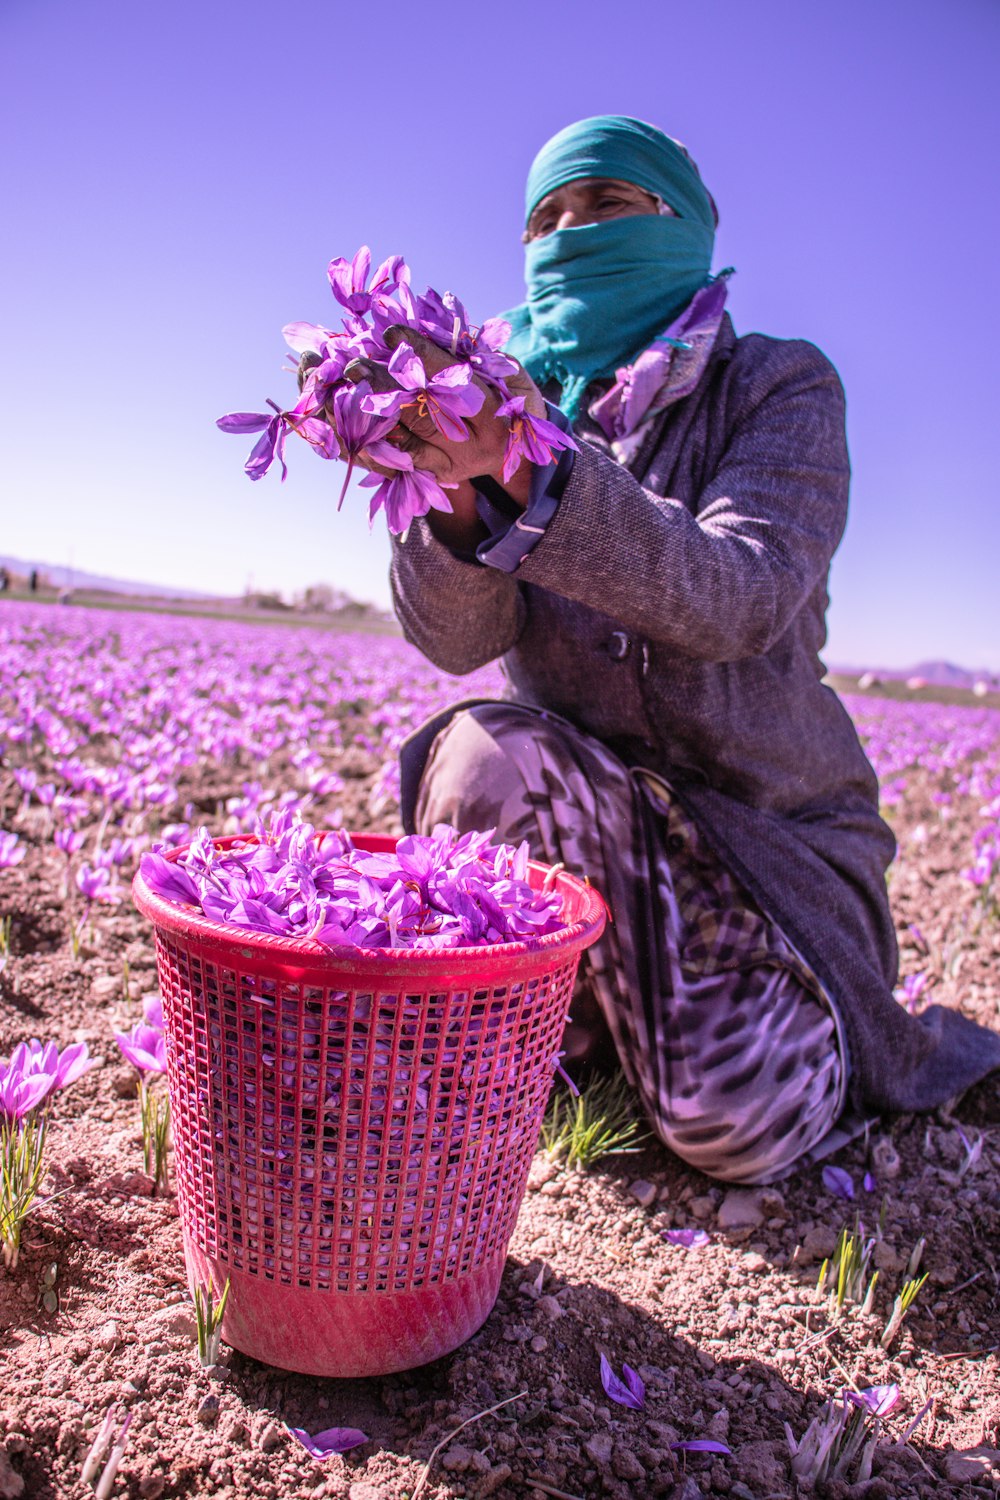 a person kneeling down in a field with purple flowers